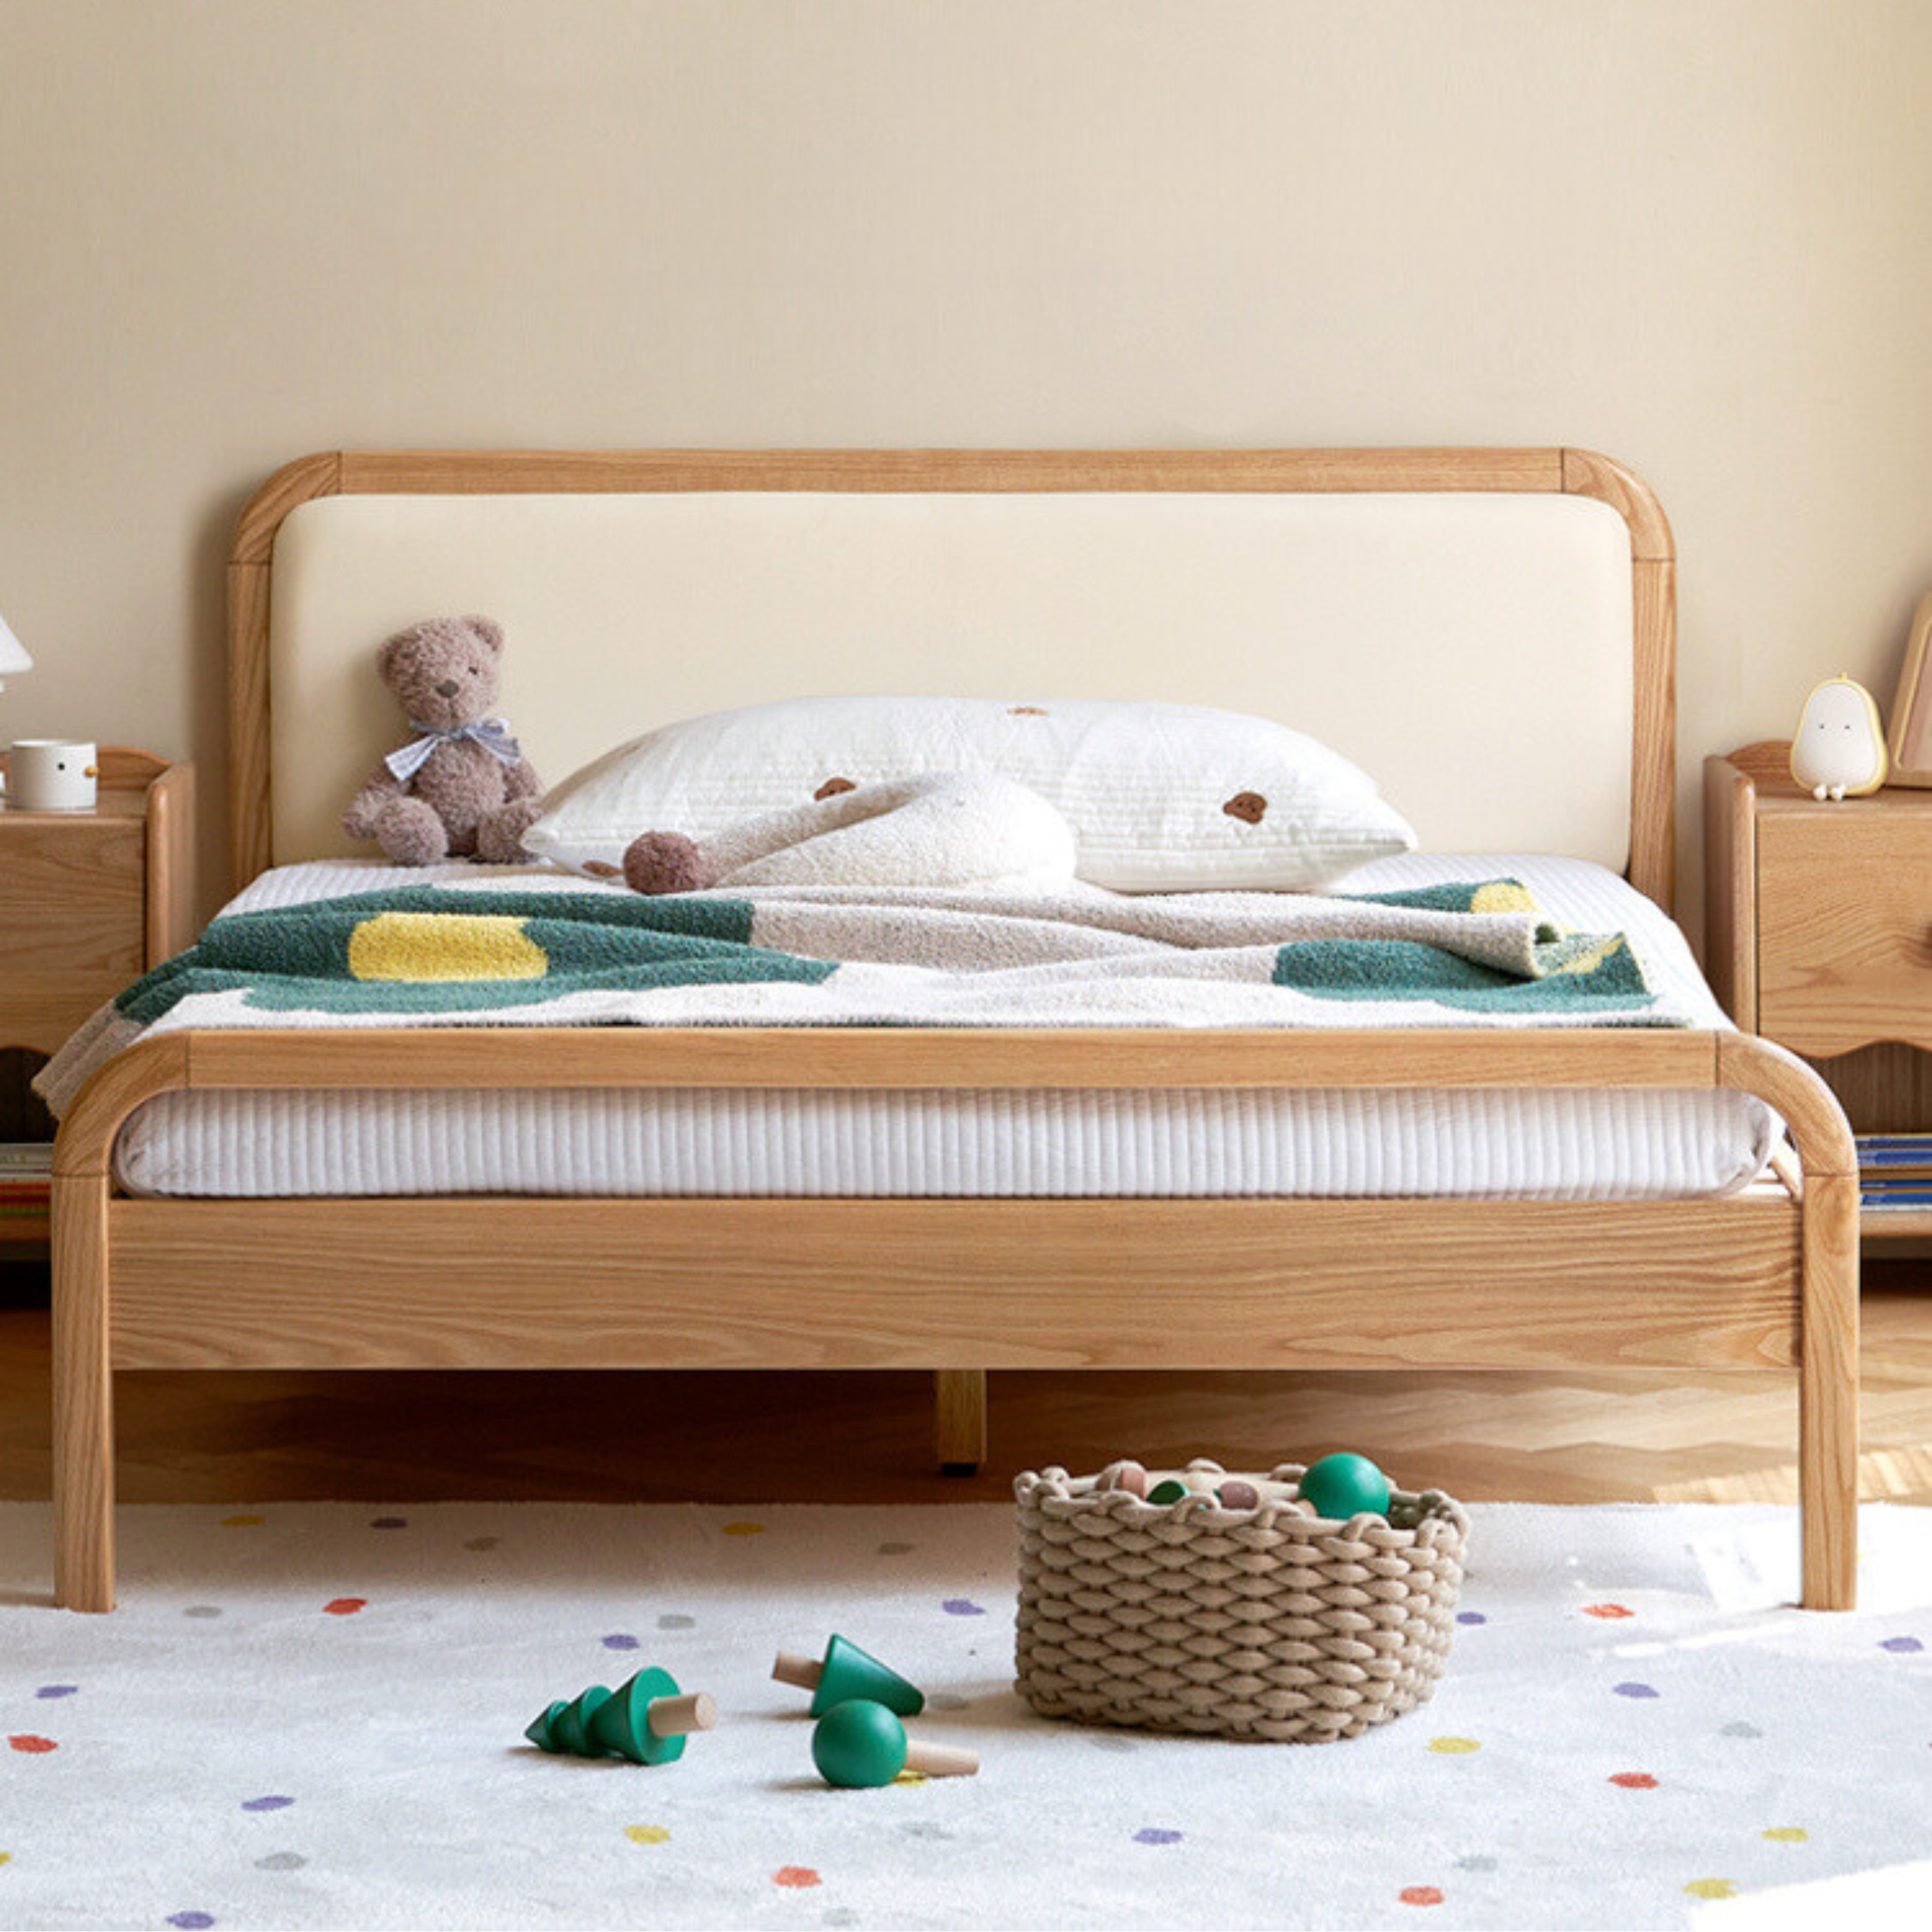 Oak solid wood children's bed with organic leather"